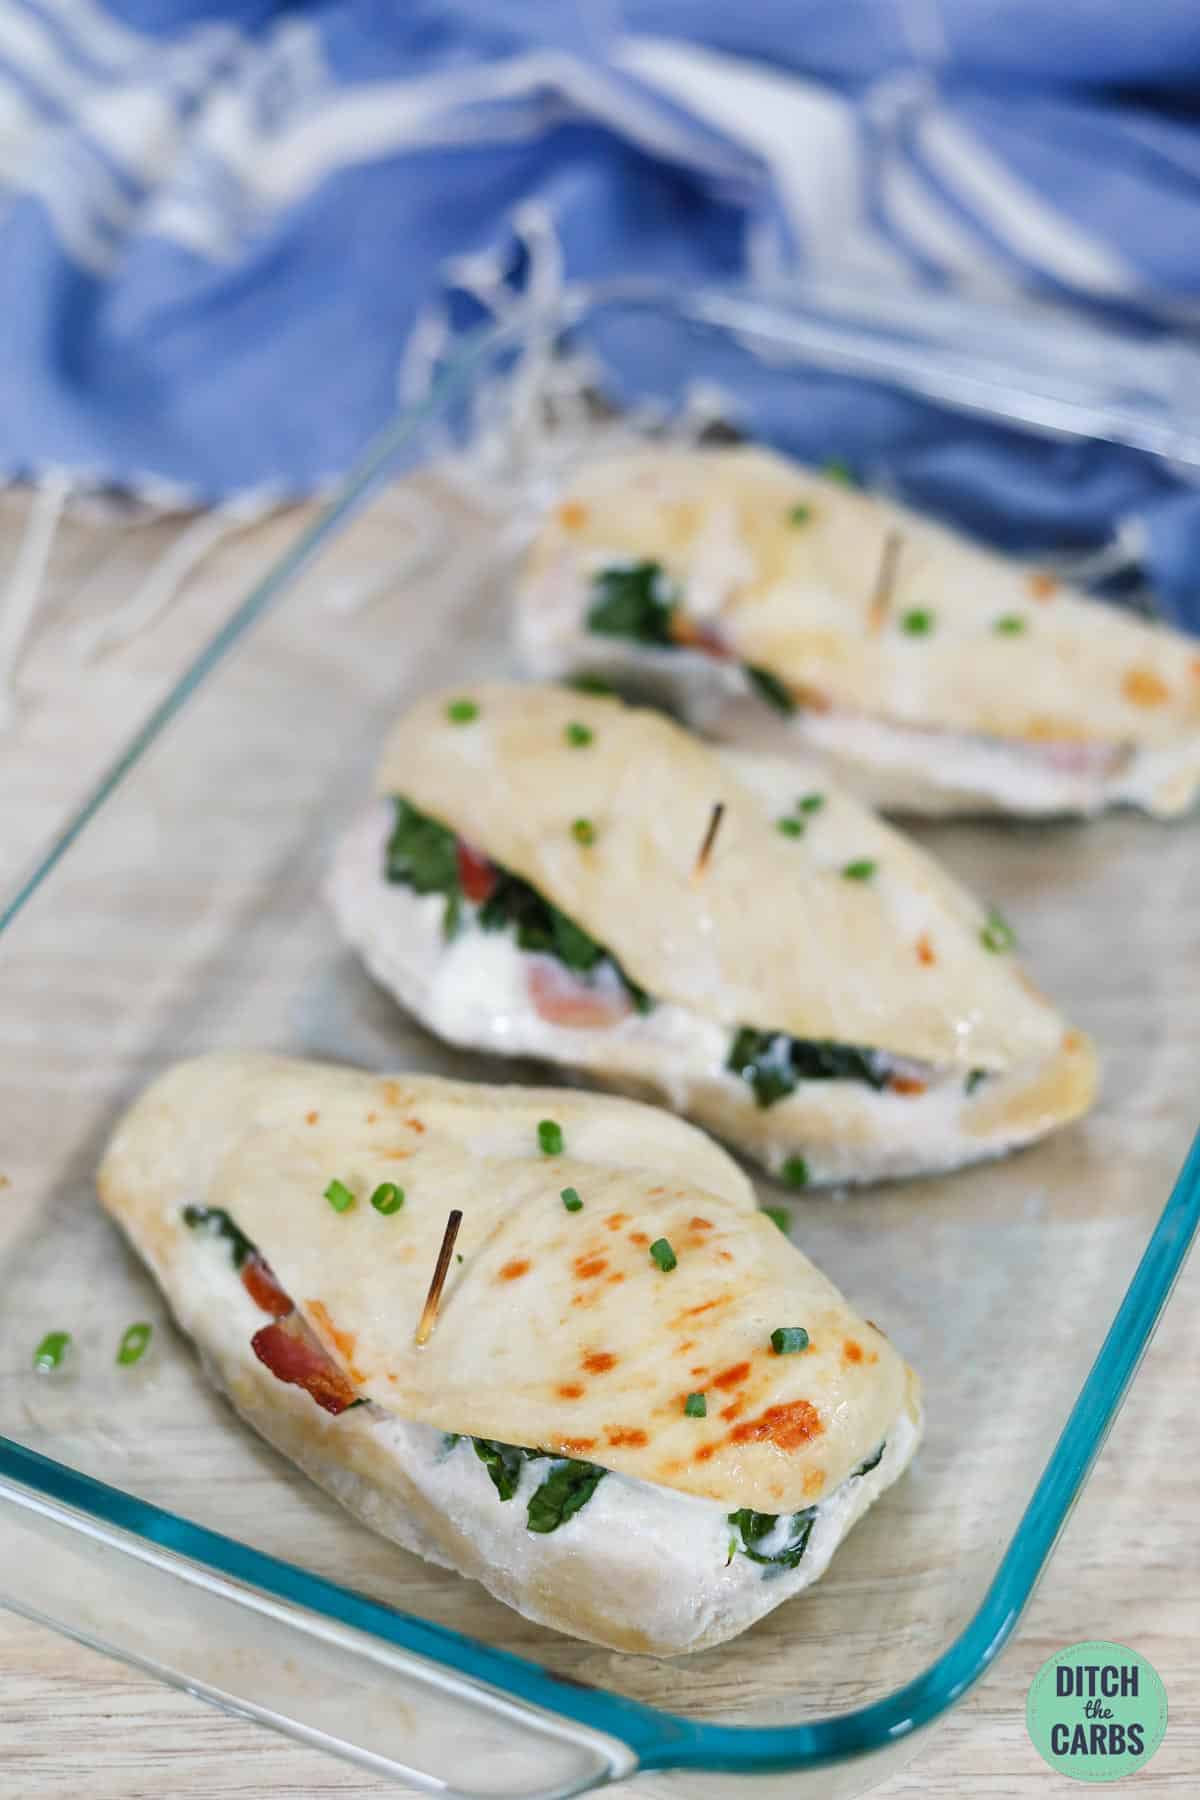 3 baked chicken breasts stuffed with cream cheese in a glass baking tray